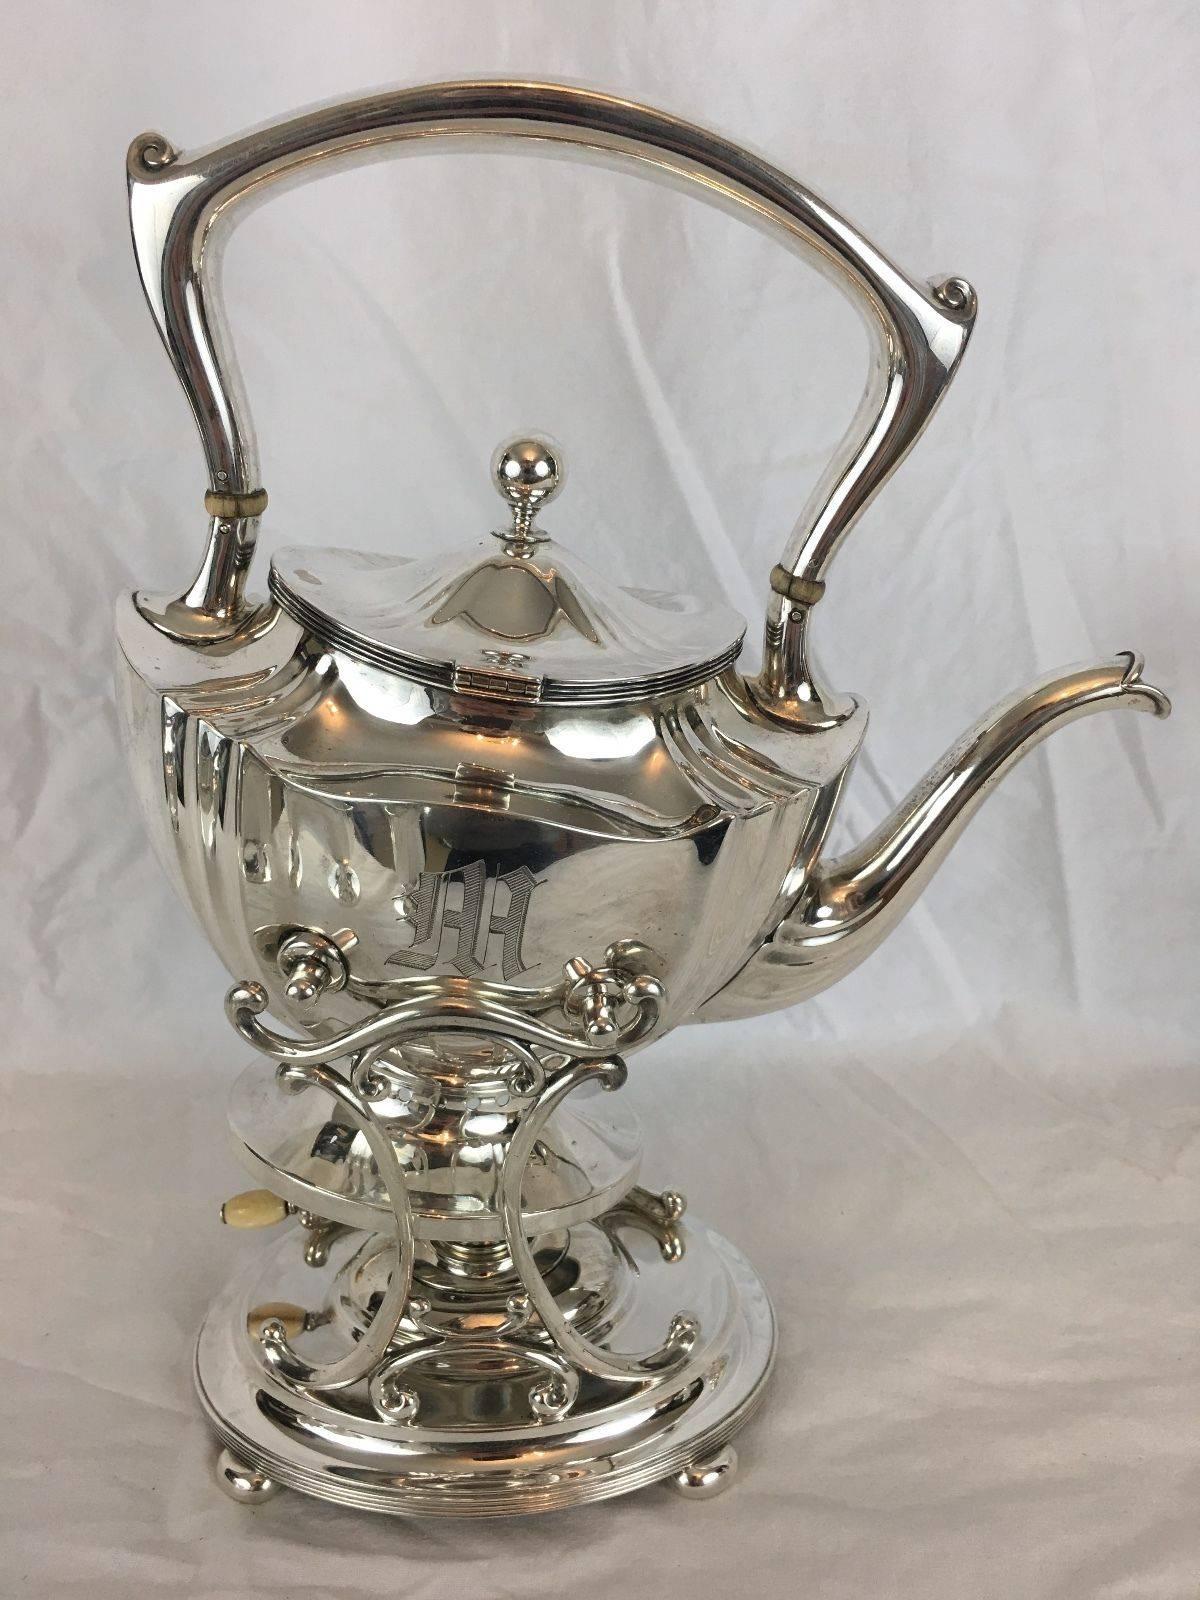 Tea and coffee service by Whiting Manufacturing Company of Massachusetts, circa 1900 

Pattern number 6950S 

Clean and neat ribbed form 

Sterling silver

Measures: Hot water kettle on stand with burner - 12